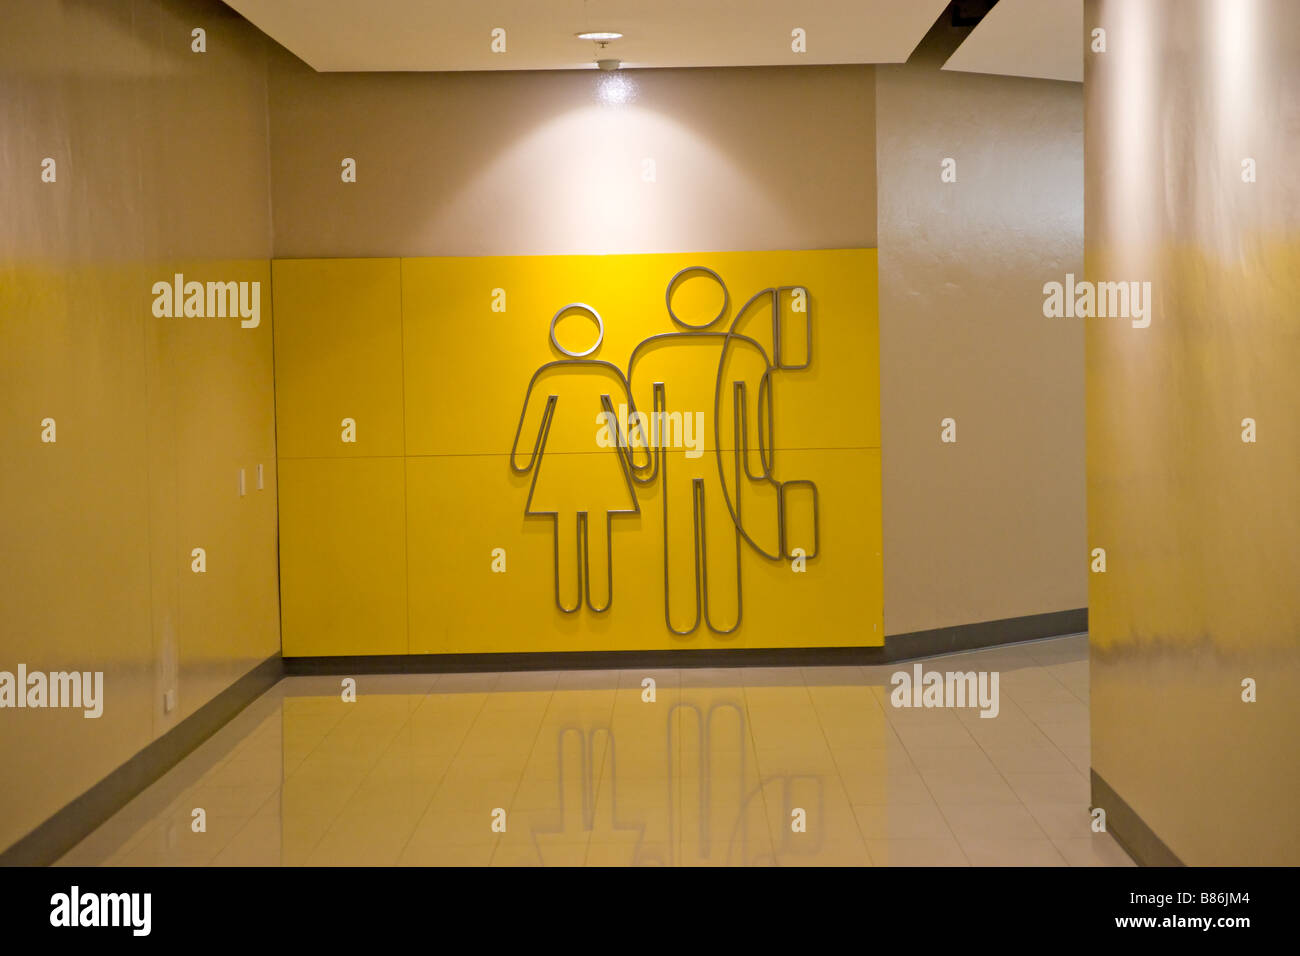 Toilet and Phone sign inside a modern shopping mall Stock Photo